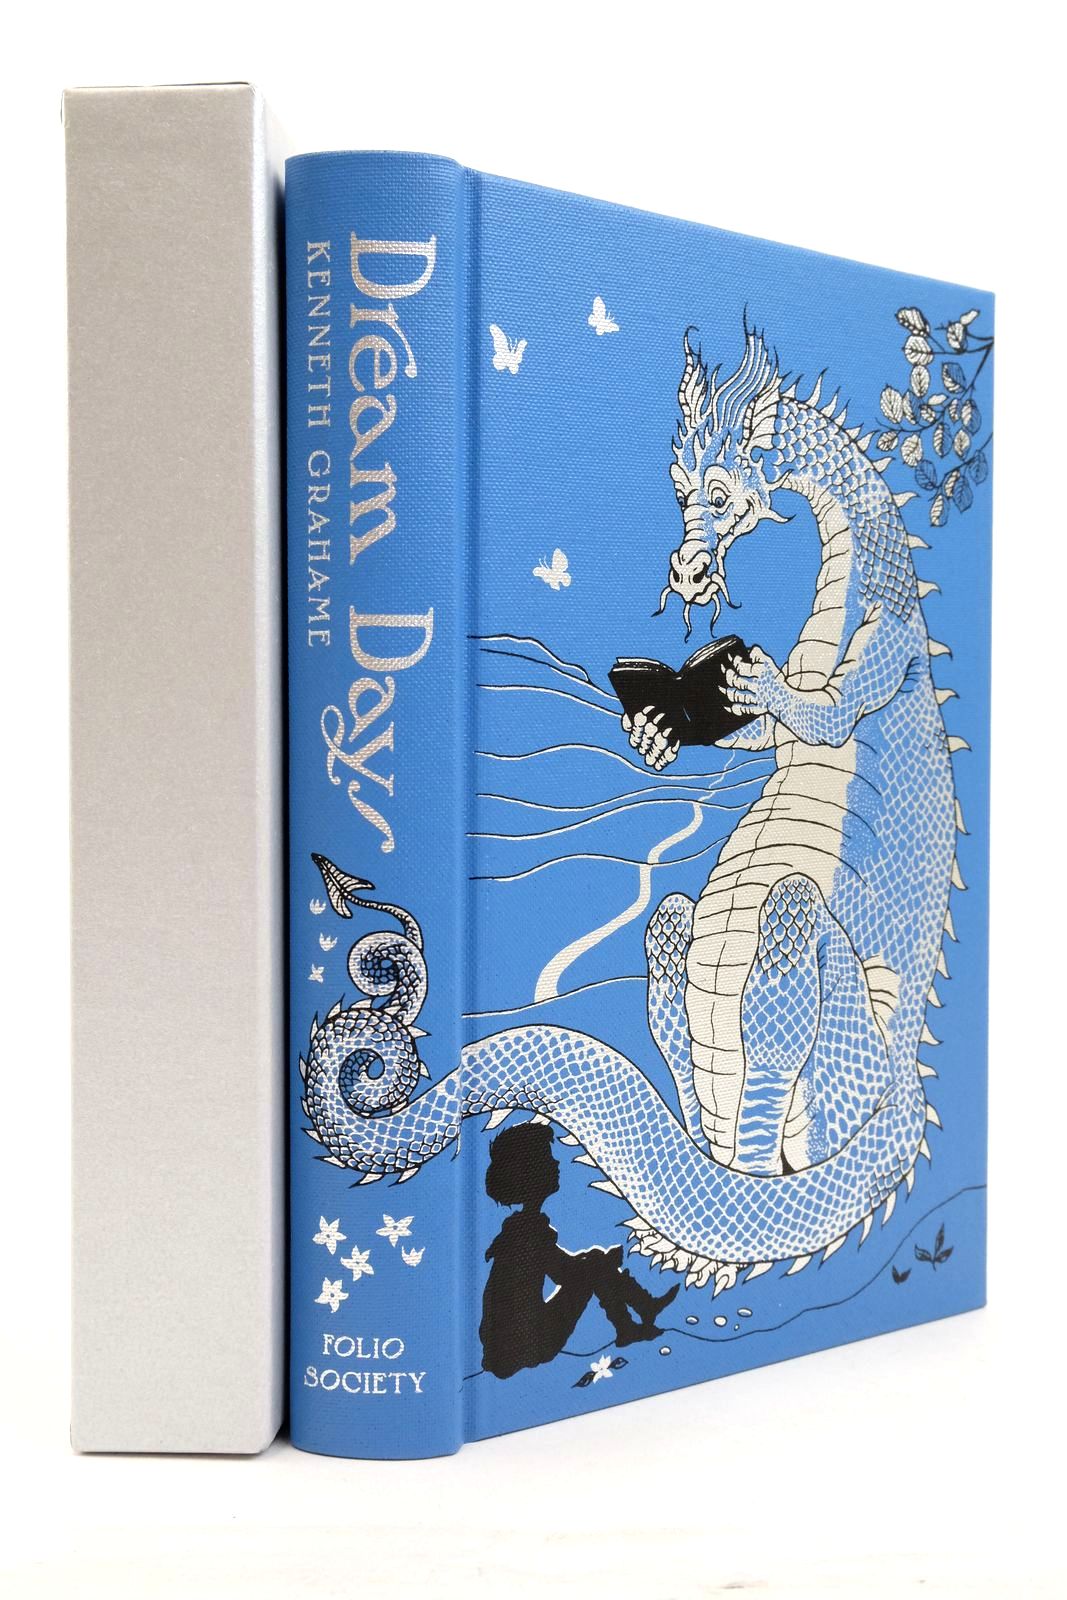 Photo of DREAM DAYS written by Grahame, Kenneth illustrated by McFarlane, Debra published by Folio Society (STOCK CODE: 2138107)  for sale by Stella & Rose's Books